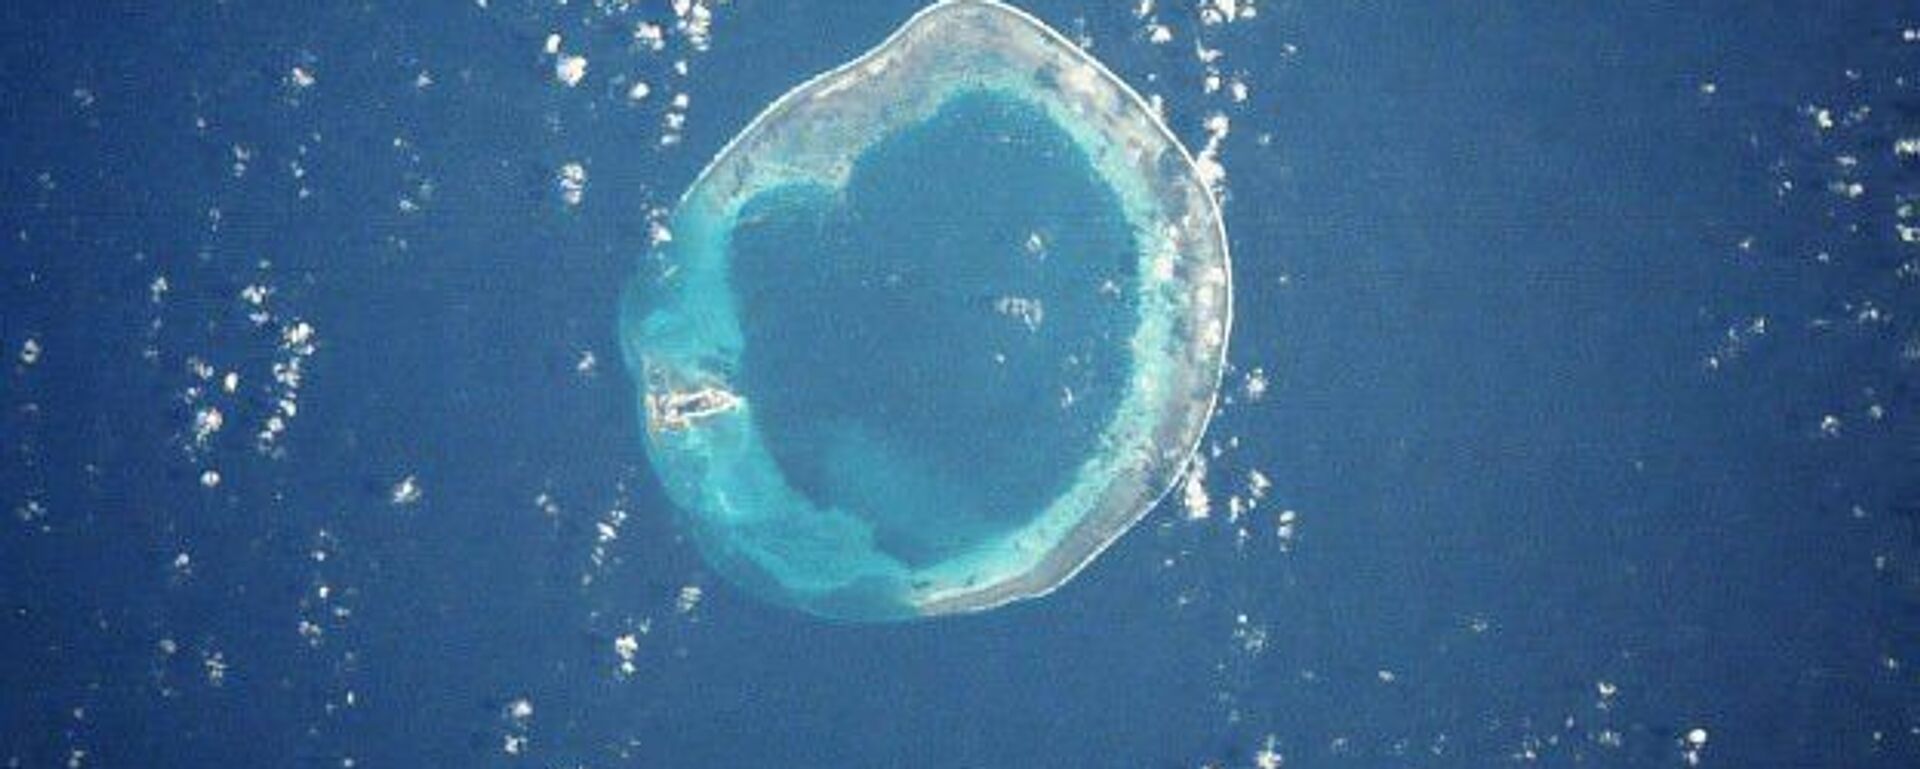 Satellite photo of Pratas (Dongsha) Island, a 590-acre island which sits 270 miles south of Taiwan and 200 miles east of China in the South China Sea. It is controlled by Taiwan. The island is on the left side - the rest is submerged reef. - Sputnik International, 1920, 07.11.2021